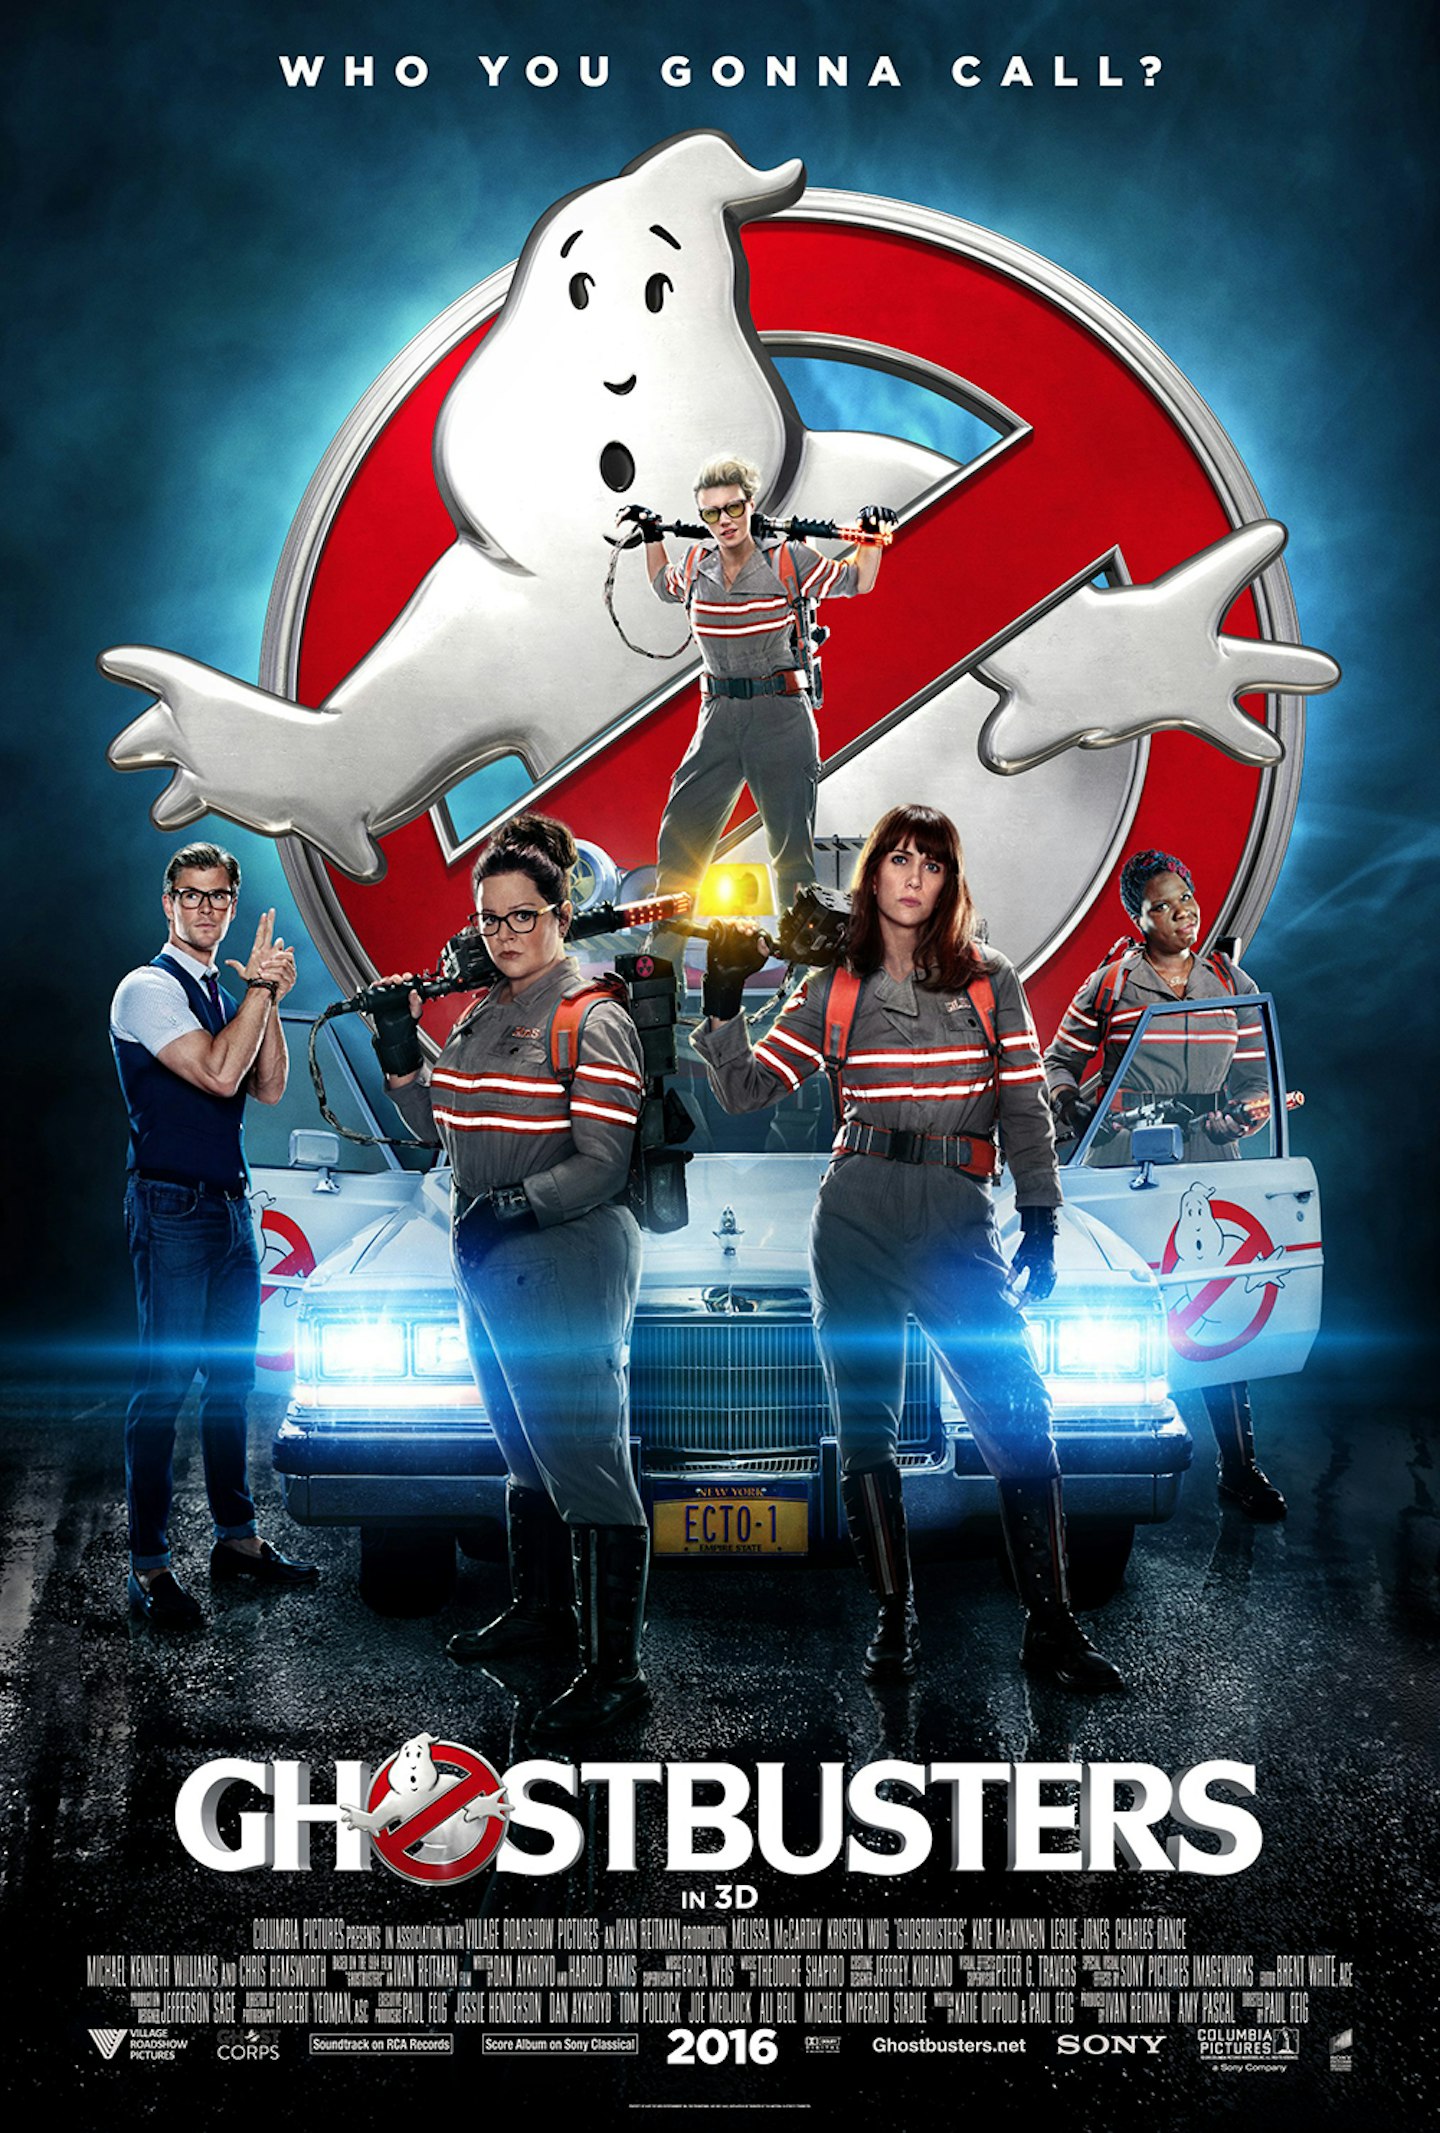 New Ghostbusters poster